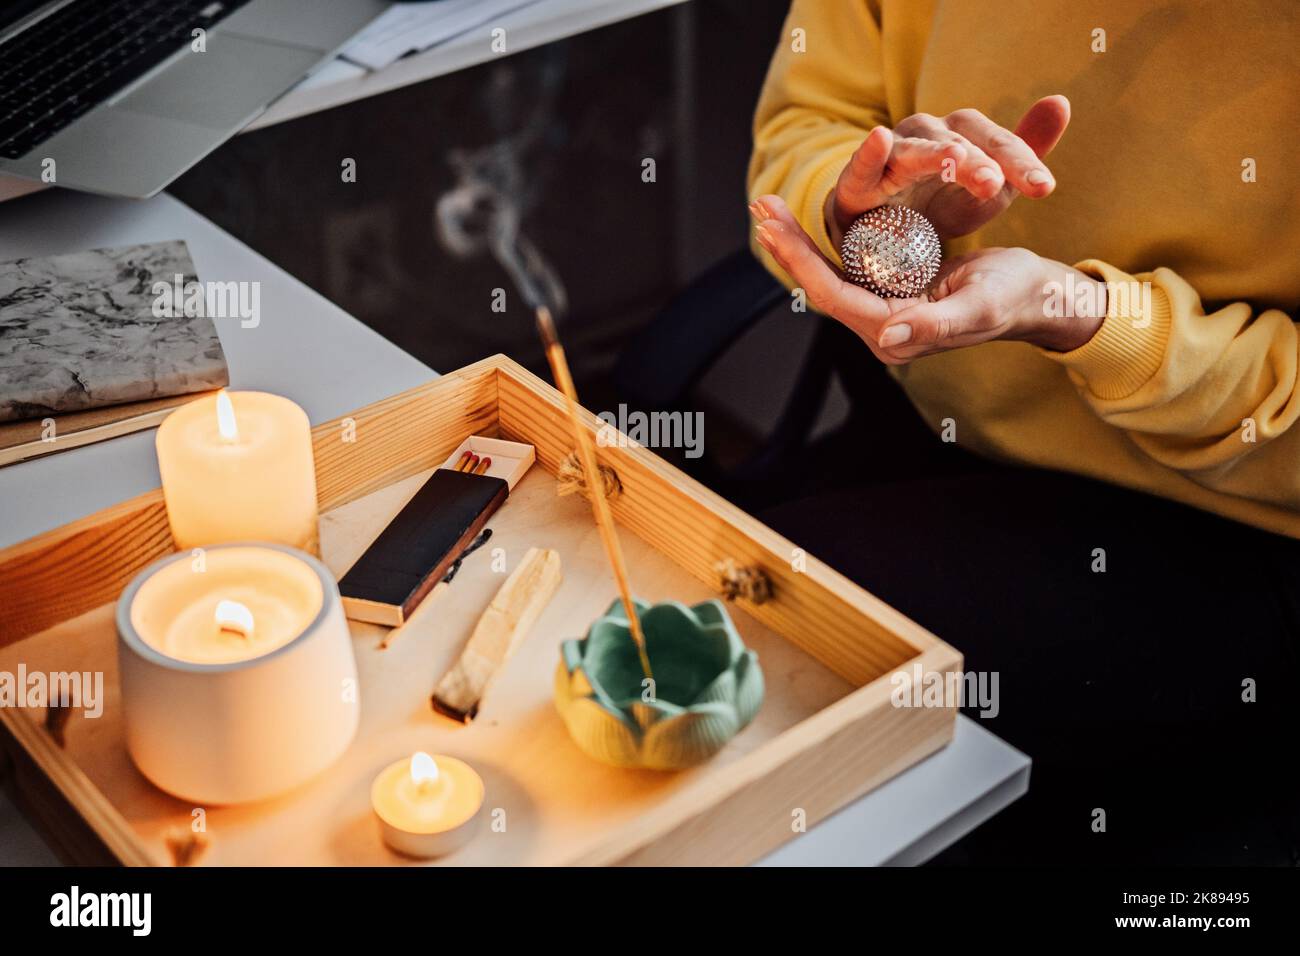 Work life balance. Mental health, mindfulness, wellbeing. Womans hands with massage Acupuncture Su Jok ball near table burning candles and aroma Stock Photo